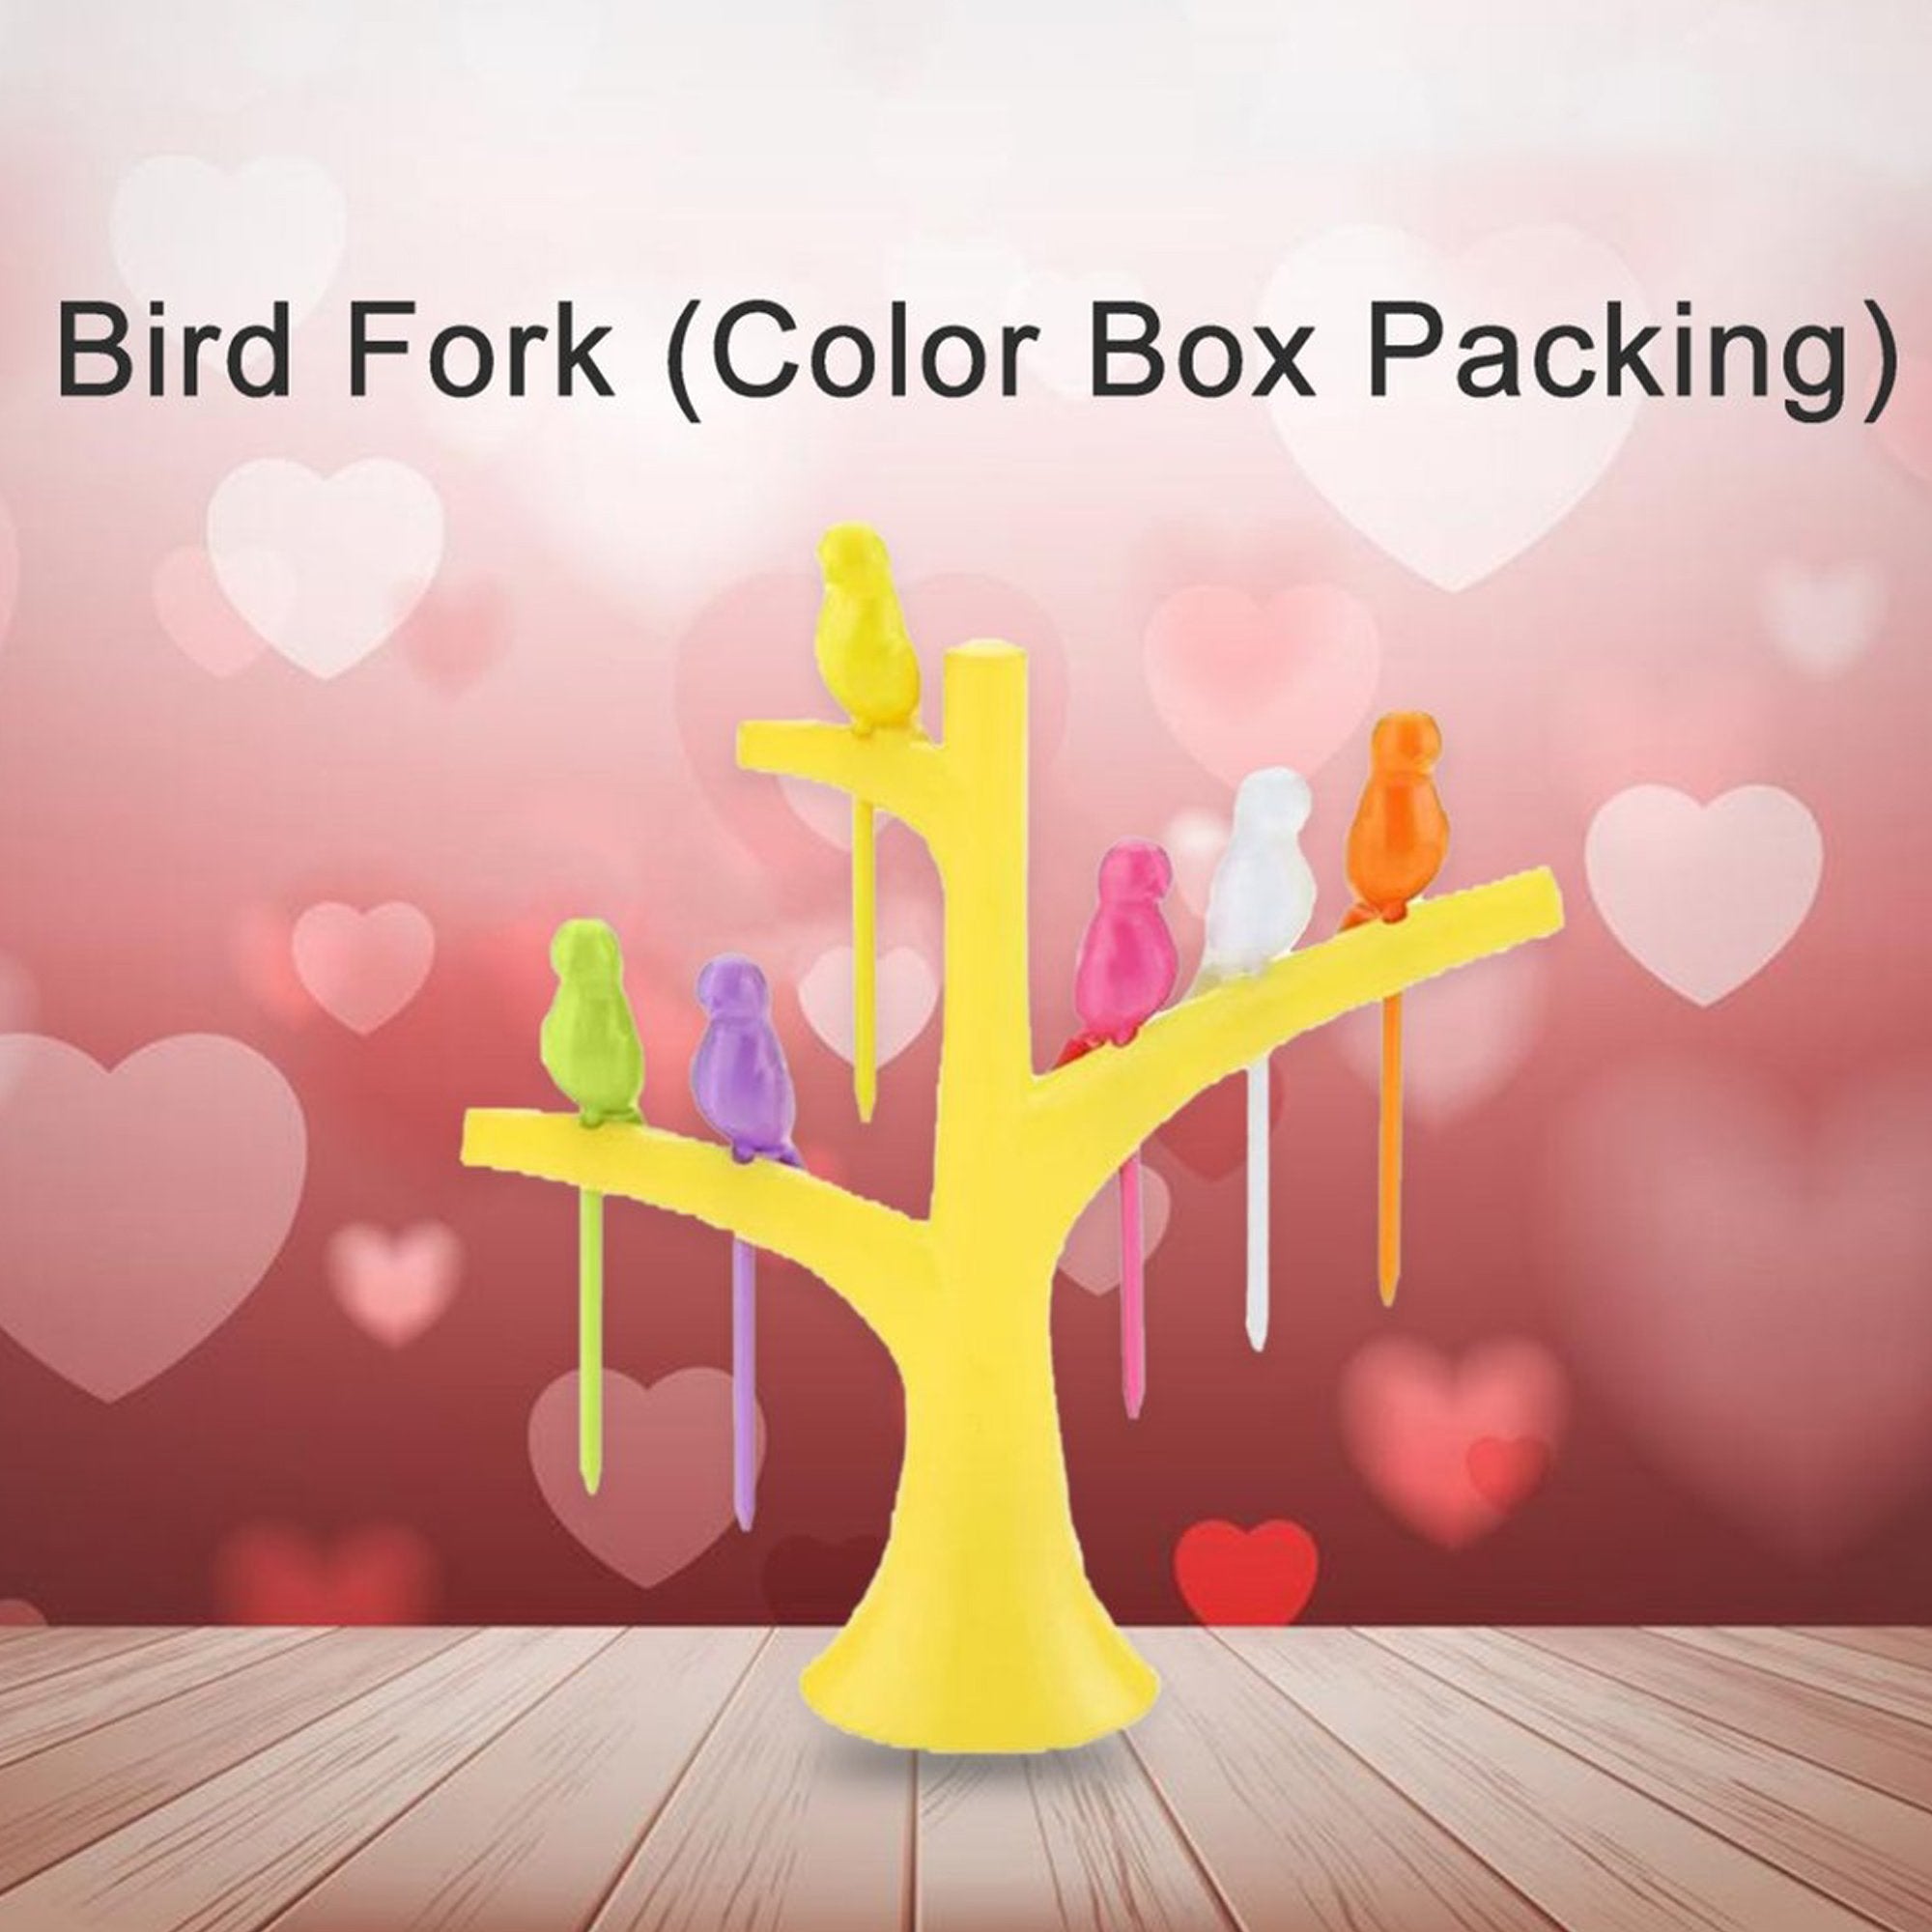 0056 Bird Fork (Color Box Packing) - SkyShopy